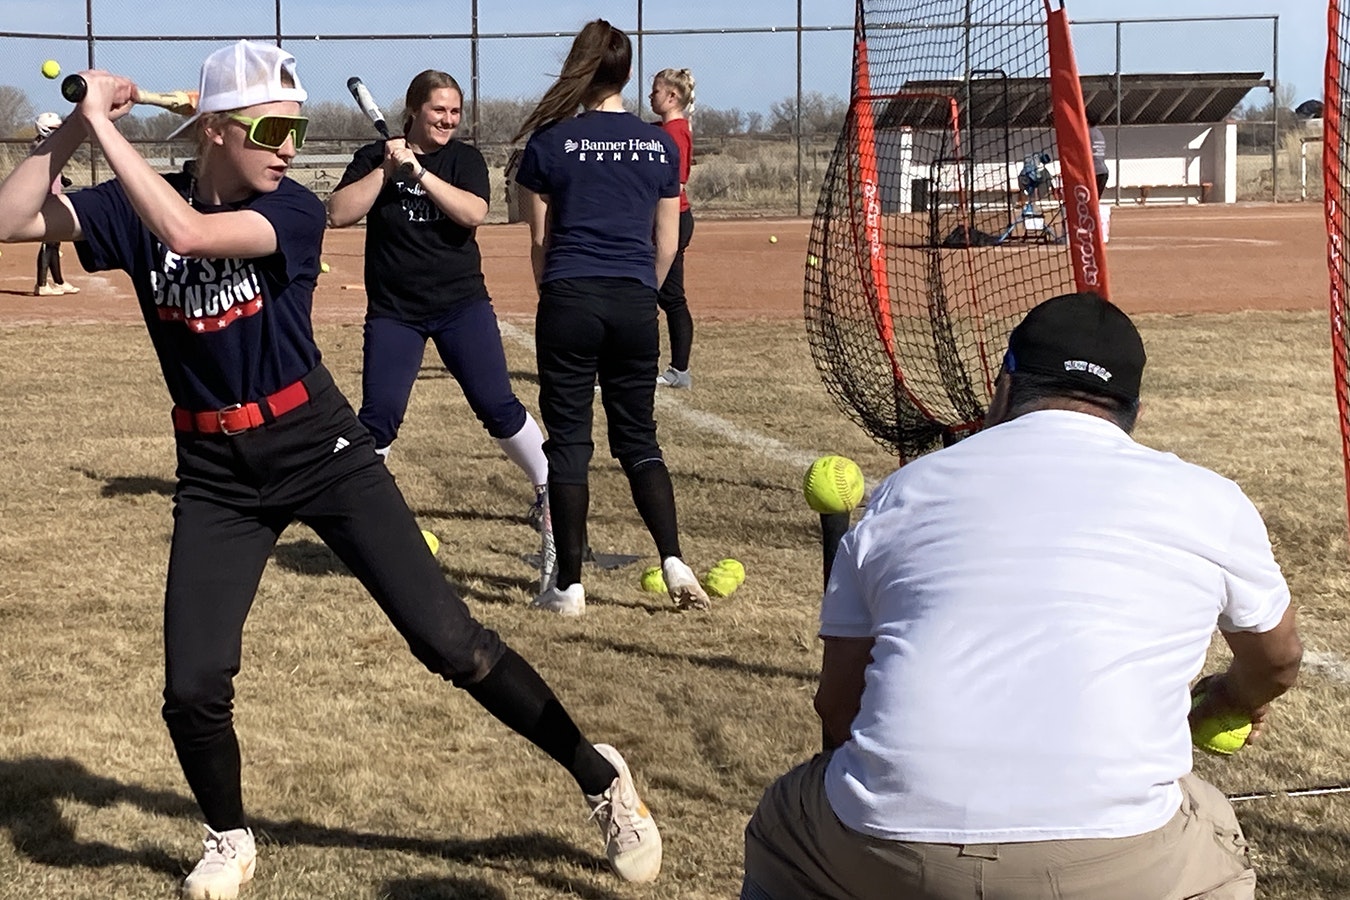 Riverton High School senior Cassy Miller practices Monday with the World High girls softball team. Miller and 12 other players from Riverton, Shoshoni and Lander travel three hours every day to be part of the team